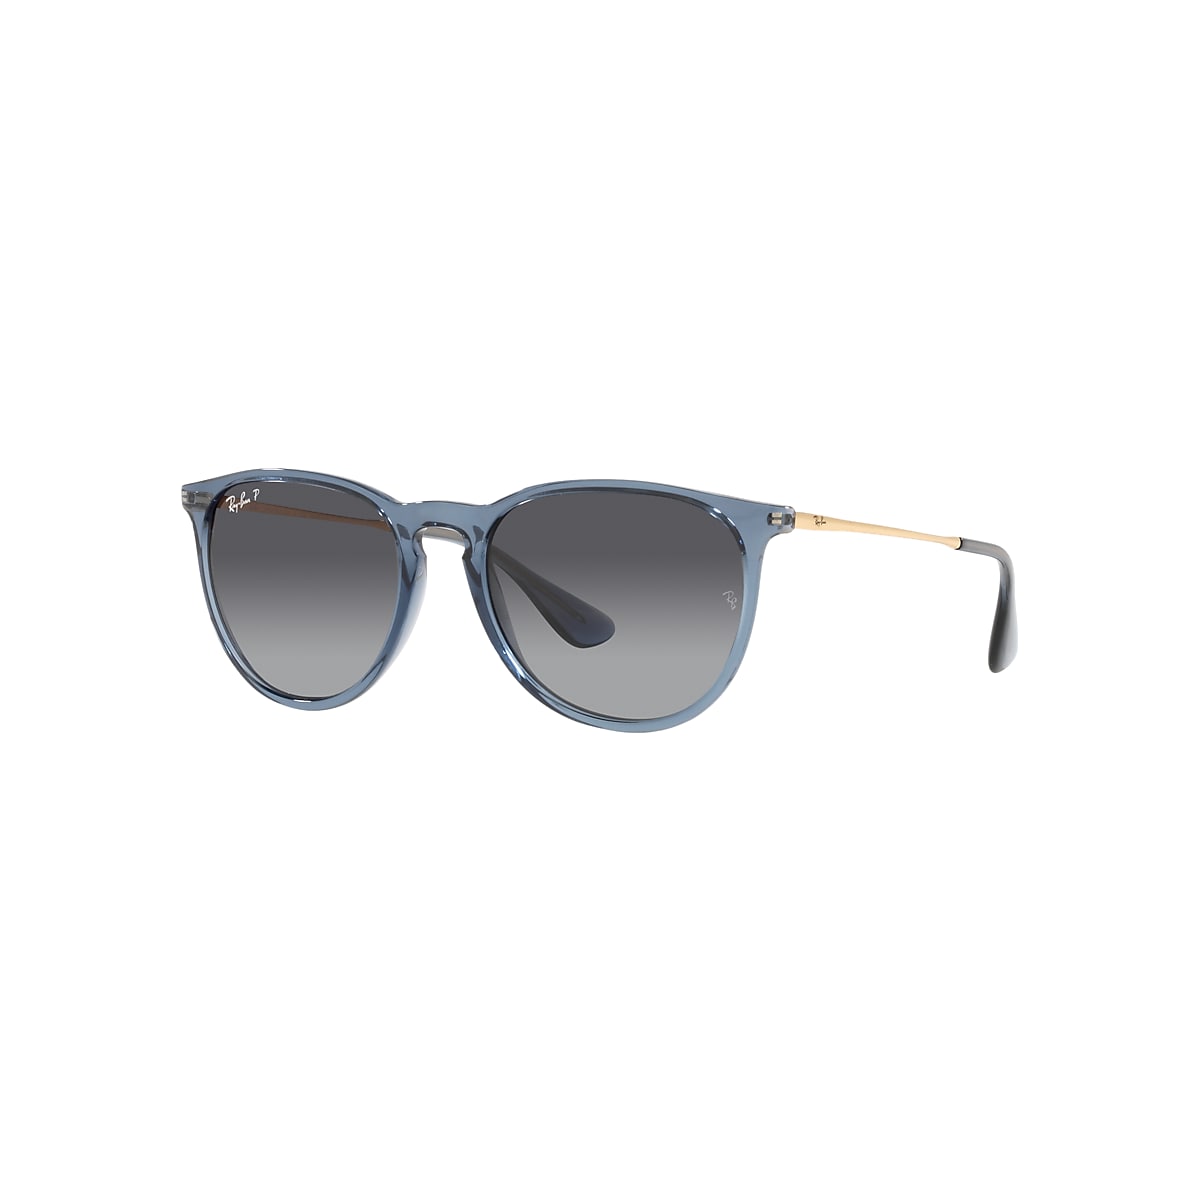 ERIKA CLASSIC Sunglasses in Transparent Blue and Grey - RB4171